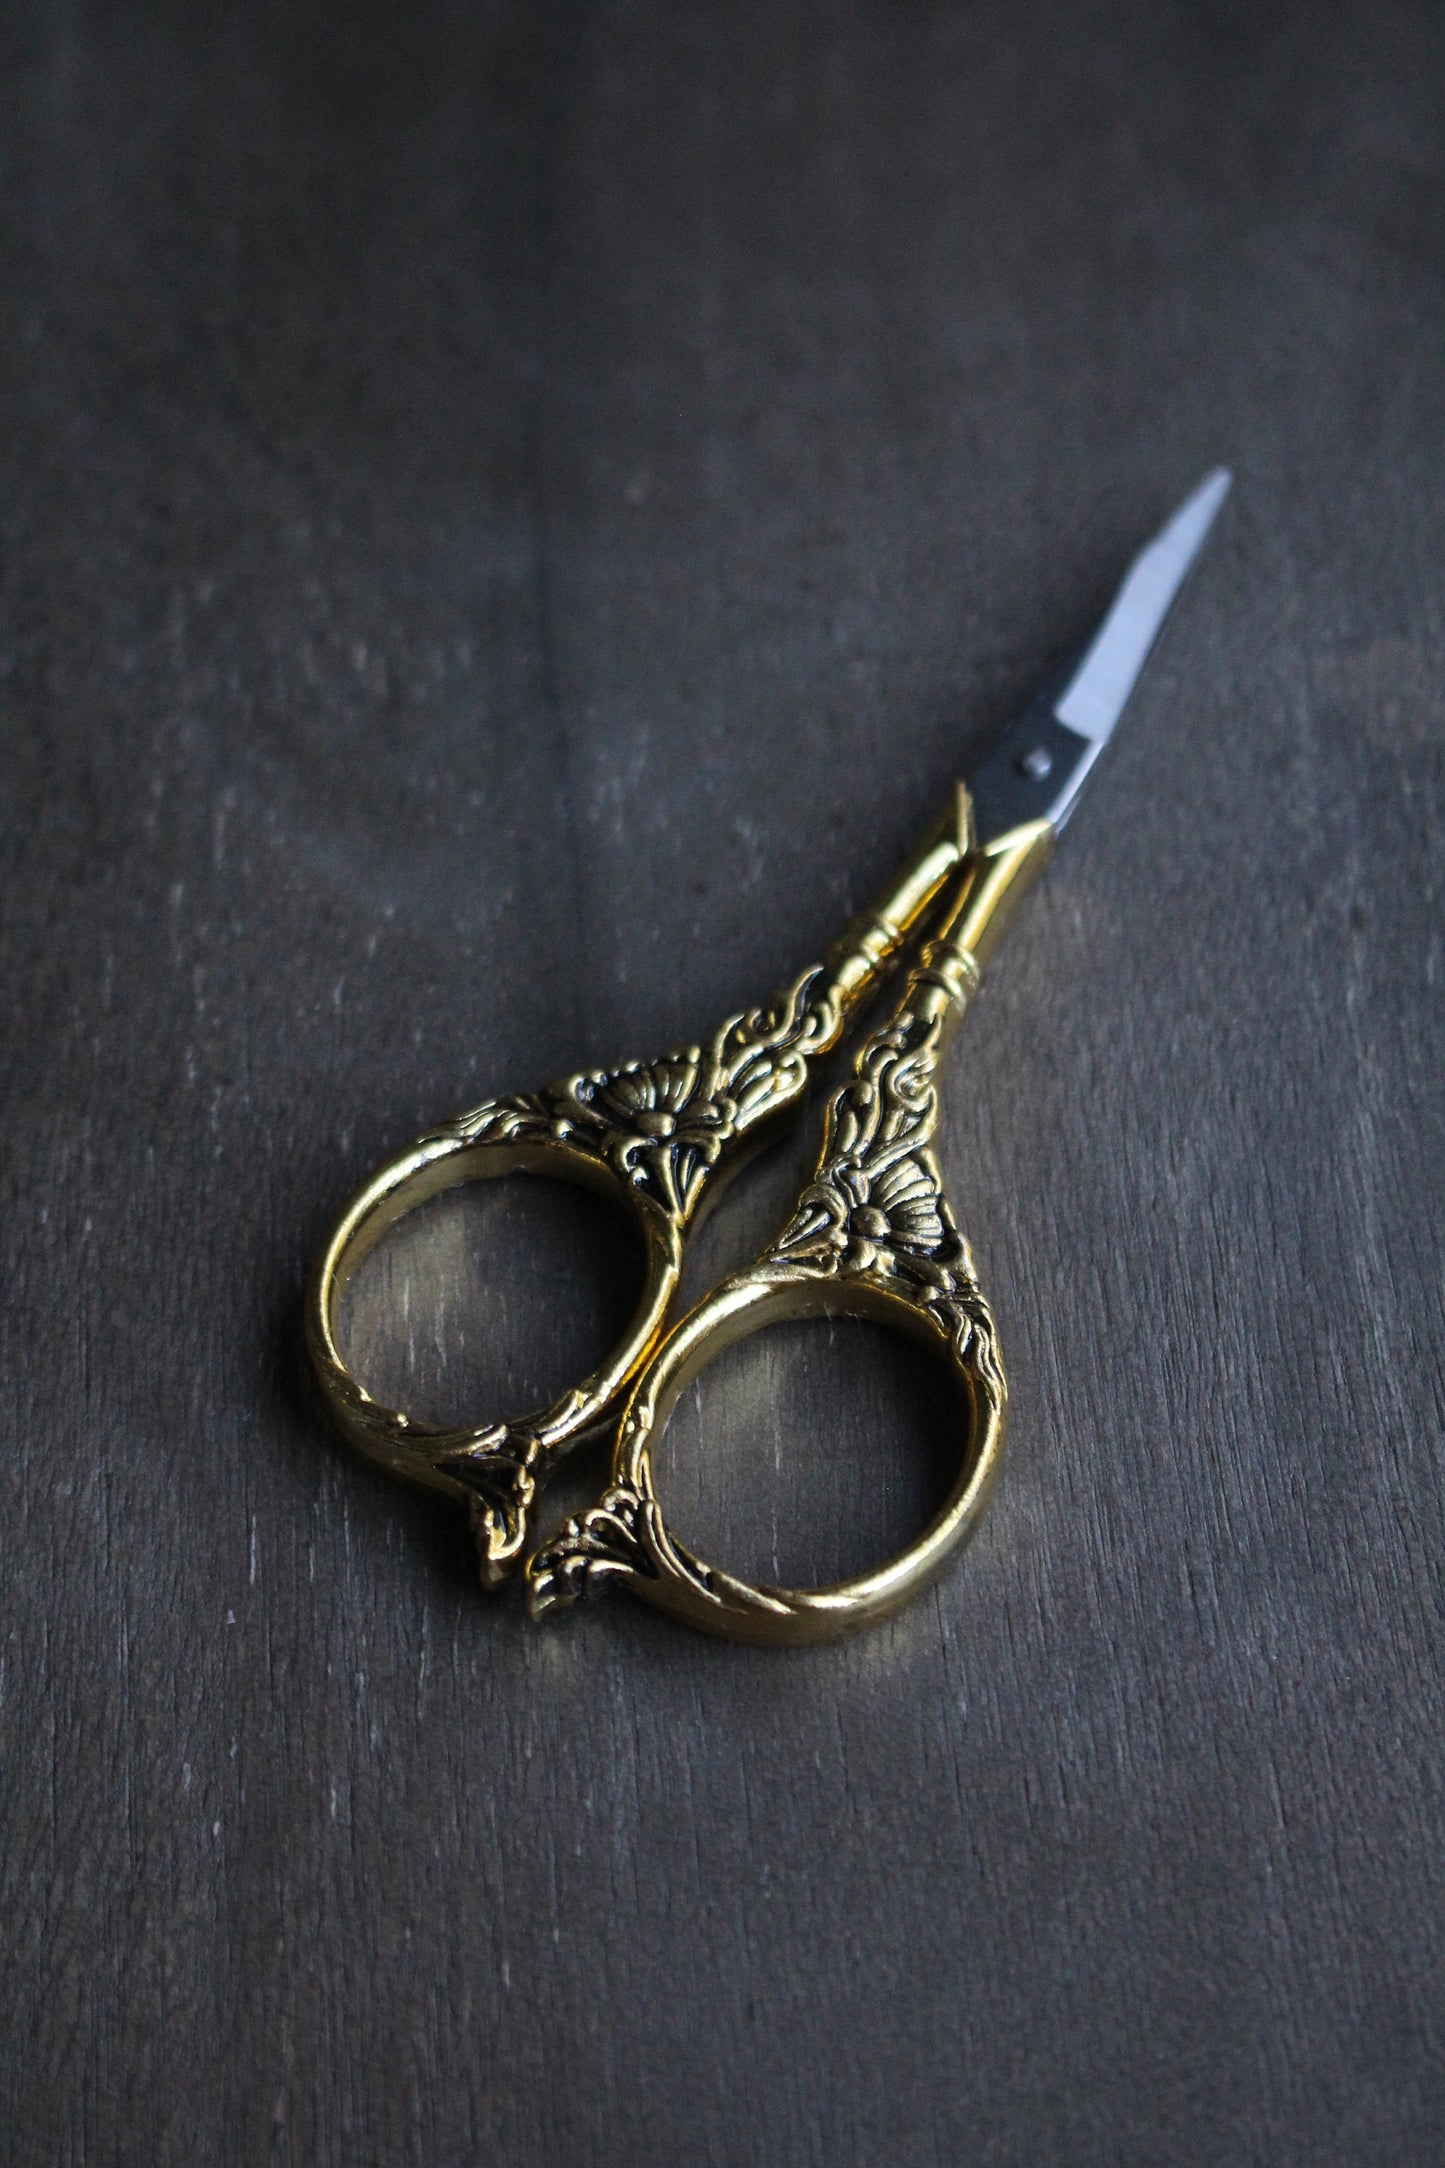 Botanical Garden embroidery scissors with stainless steel blades in bright gold